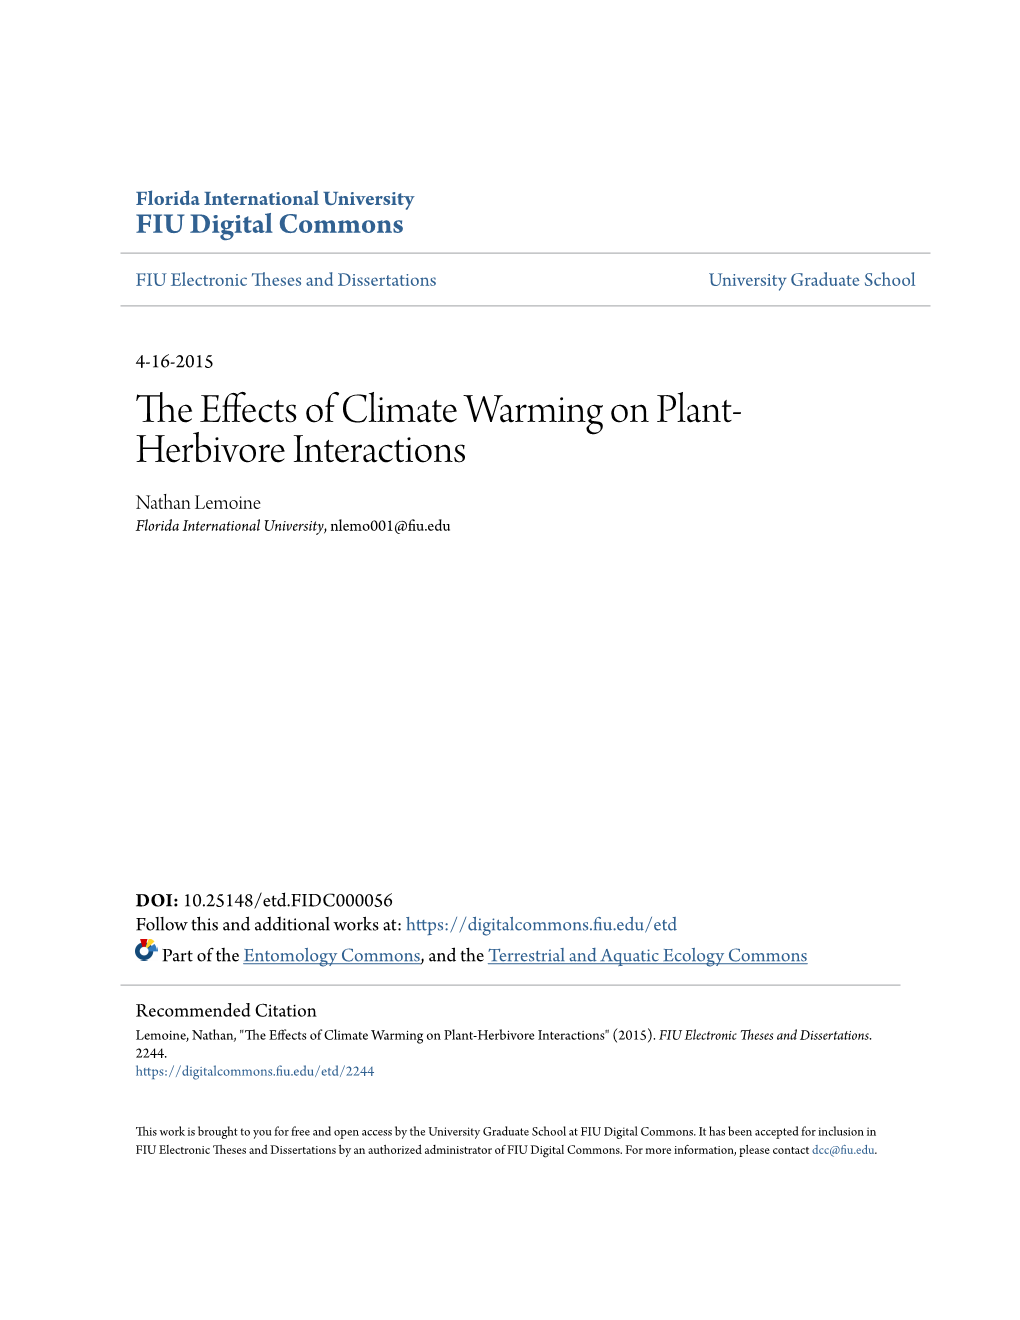 The Effects of Climate Warming on Plant-Herbivore Interactions" (2015)